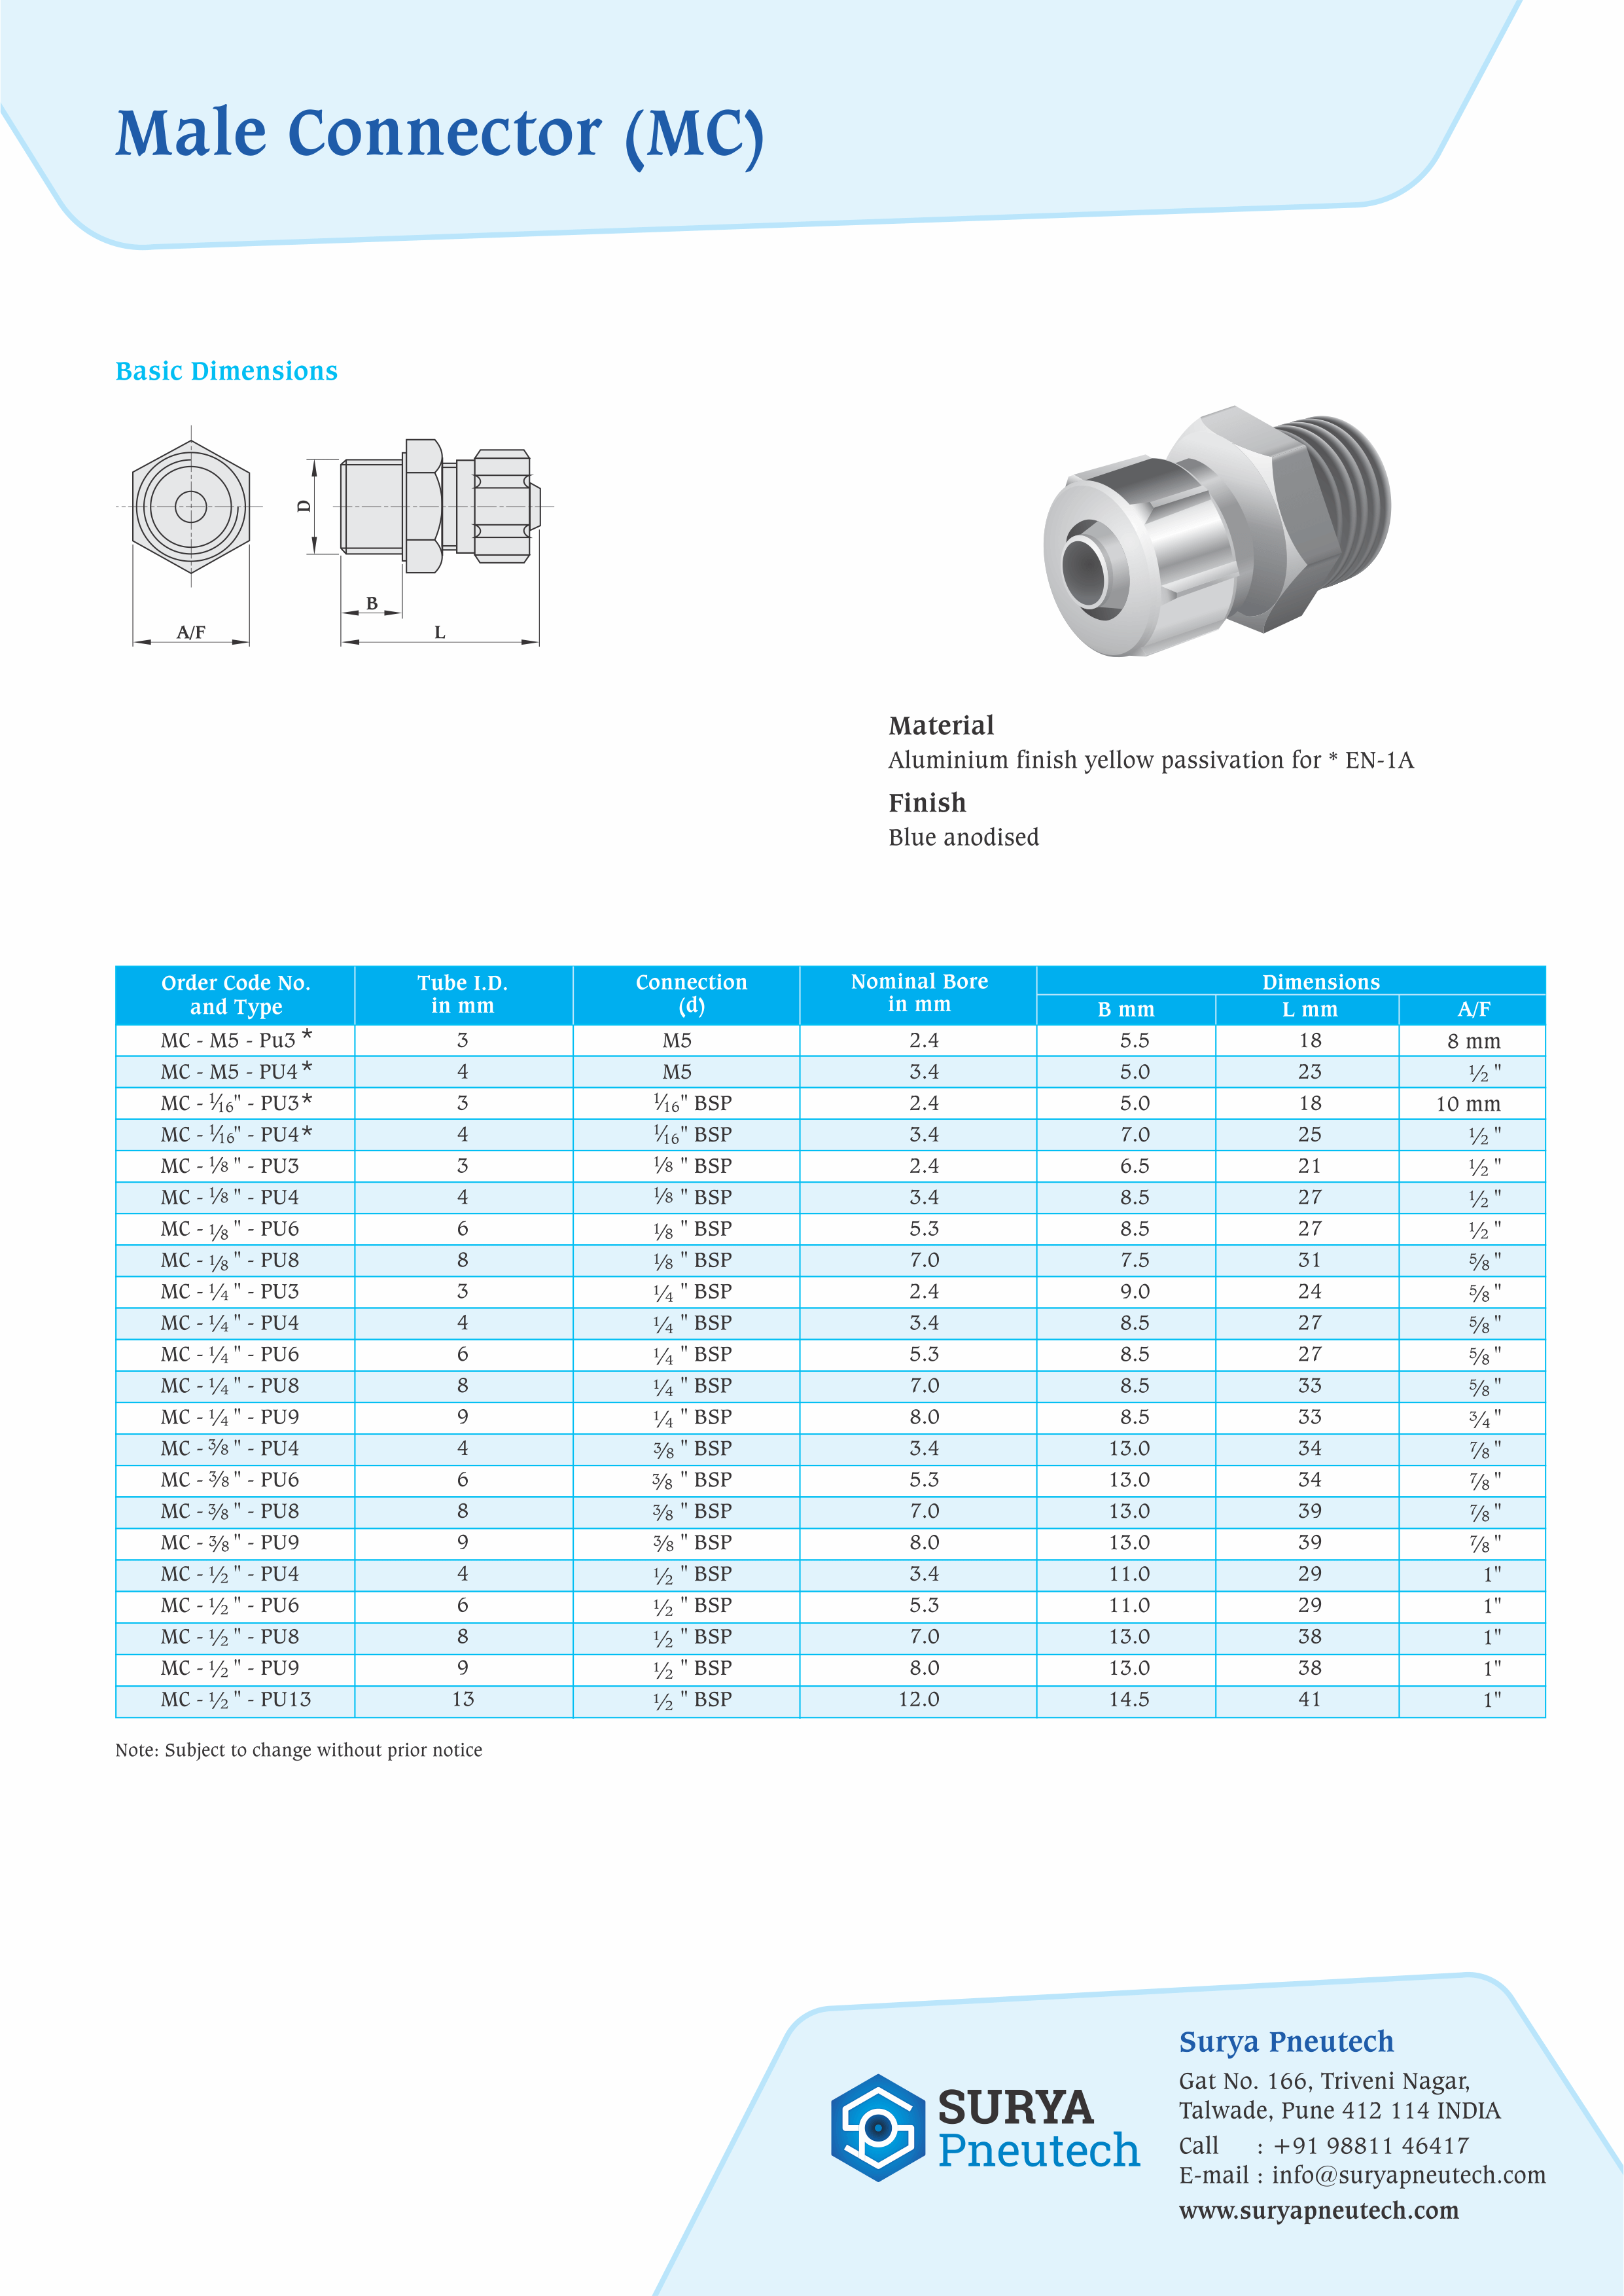 Male Connector manufacturer in India